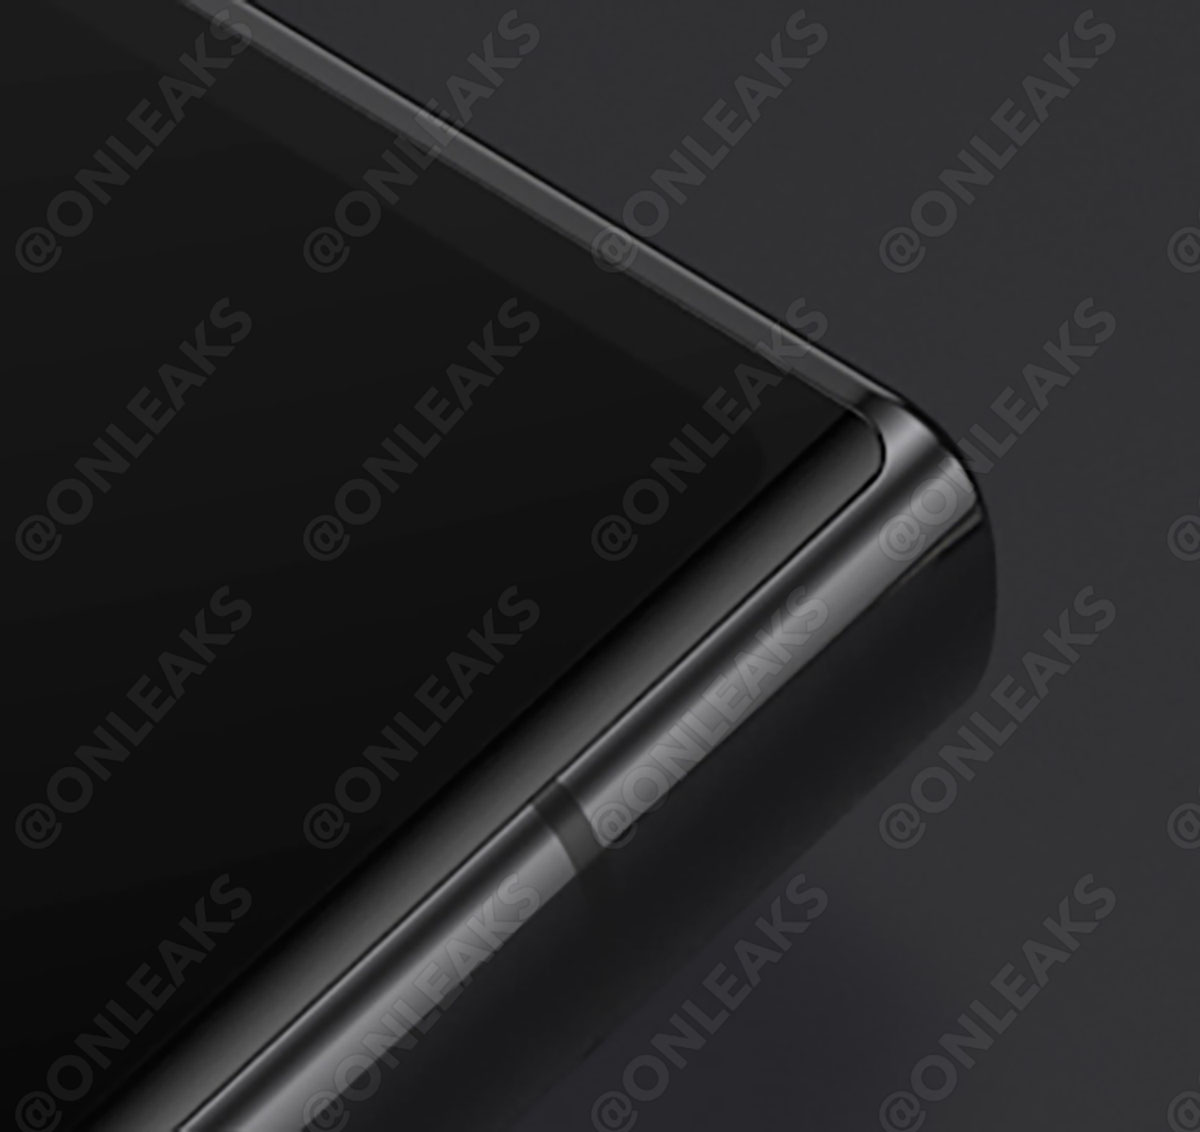 Galaxy S24 Ultra Leak Suggests The End Of Curved Displays On